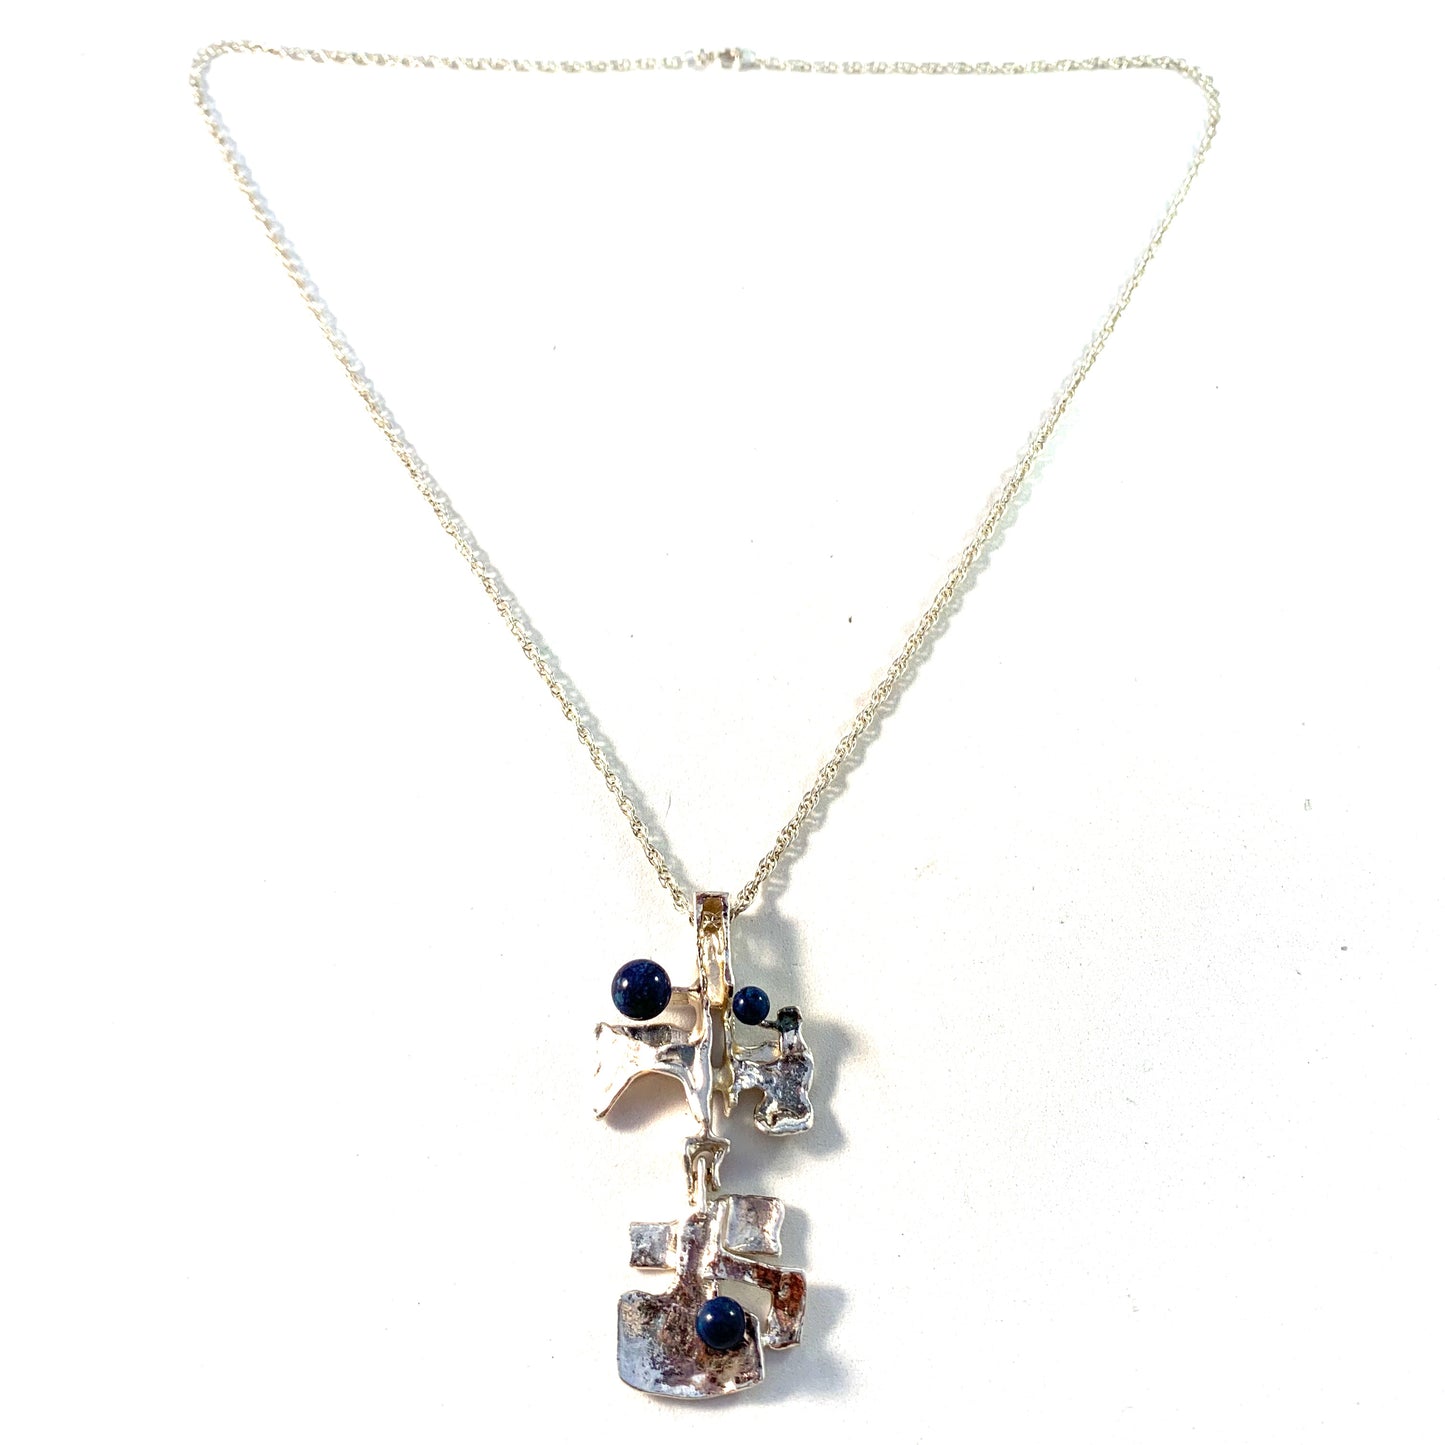 Germany / Austria 1970s Modernist Solid 830 Silver Sodalite Pendant Necklace.